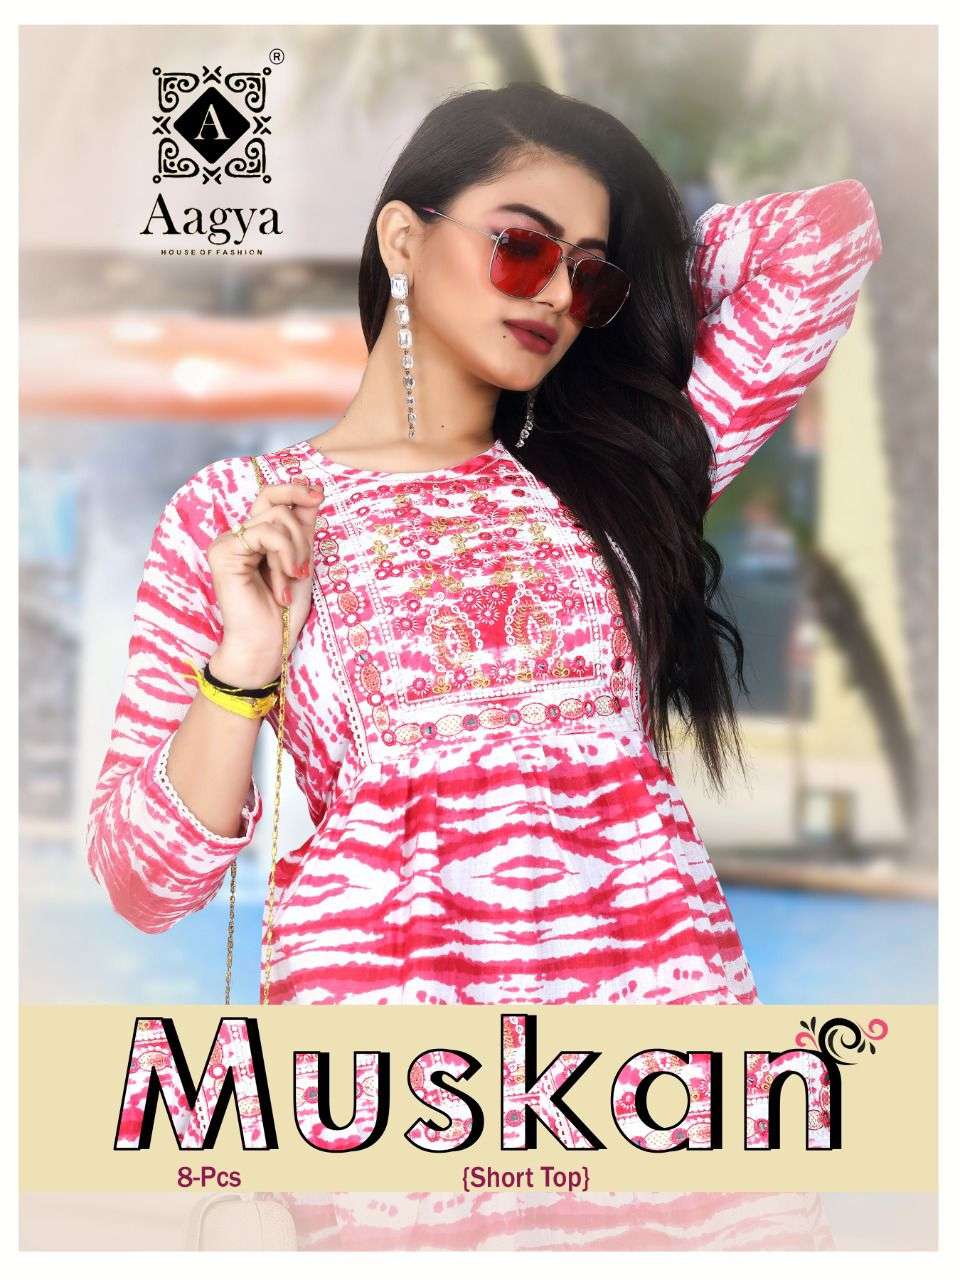 MUSKAN VOL 2 RAYON EMBROIDERY WORK WITH LACE PATTERN SHORT TOP BY AAGYA BRAND WHOLESALER AND DEALER